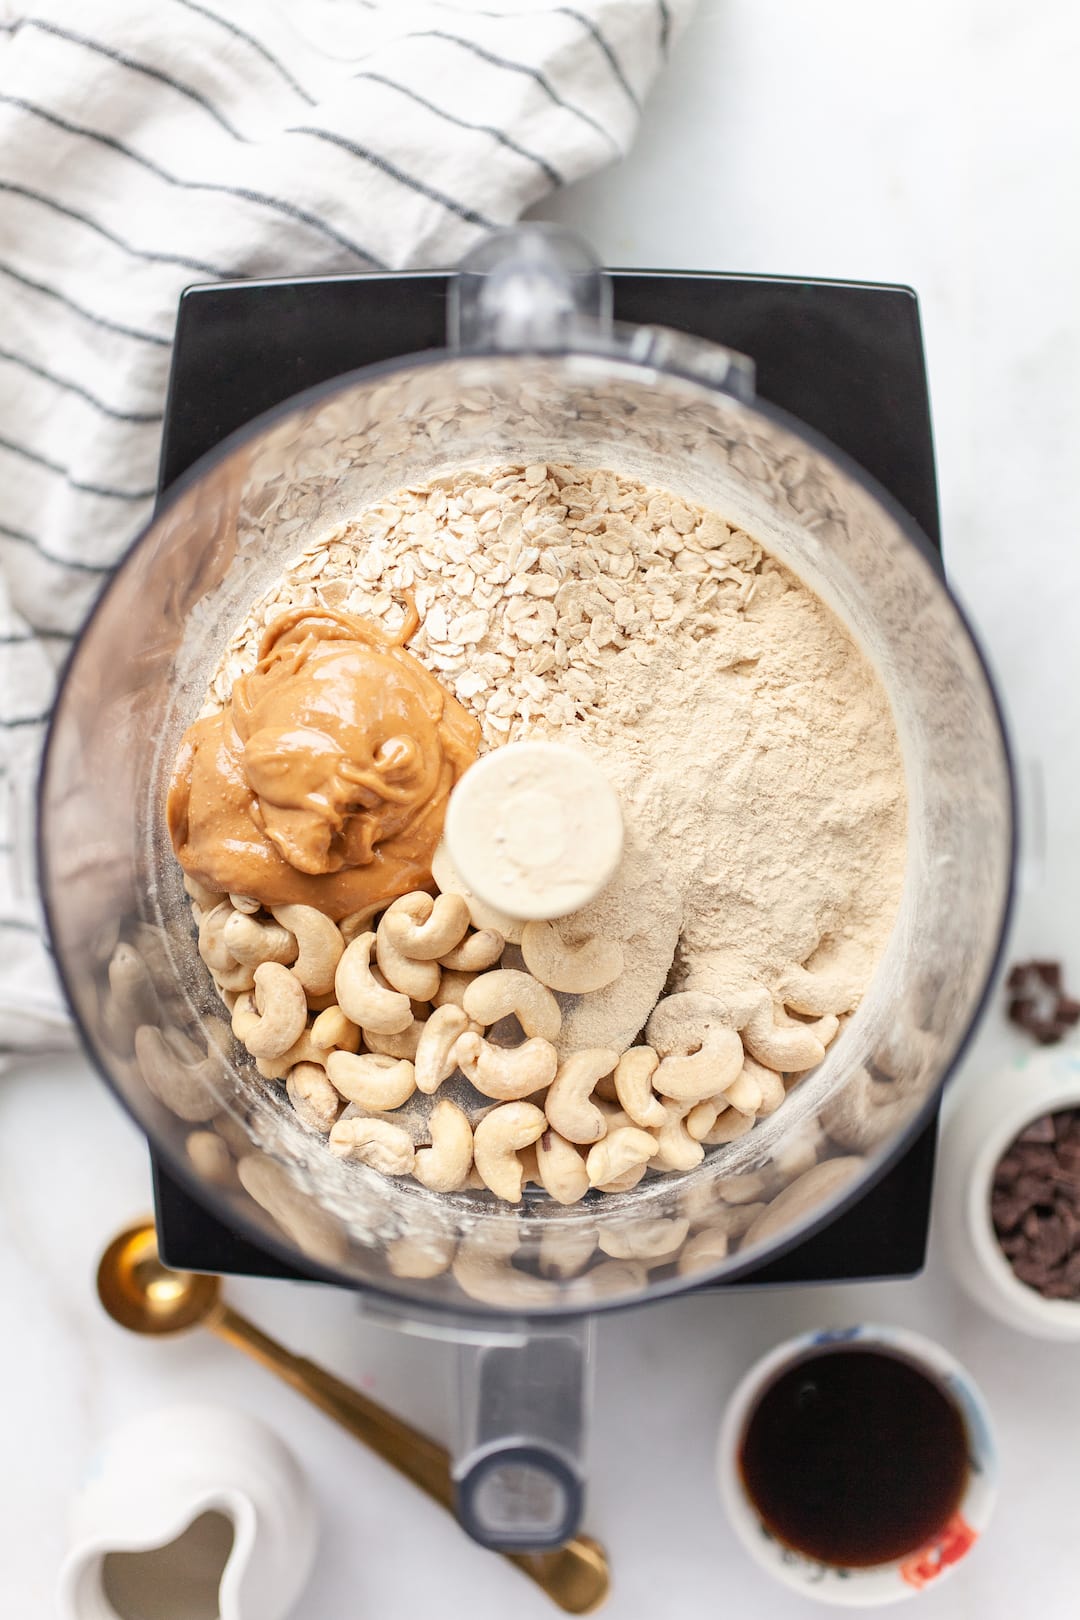 ingredients for protein cookie dough in a food processor - cashews, peanut butter, rolled oats, protein powder